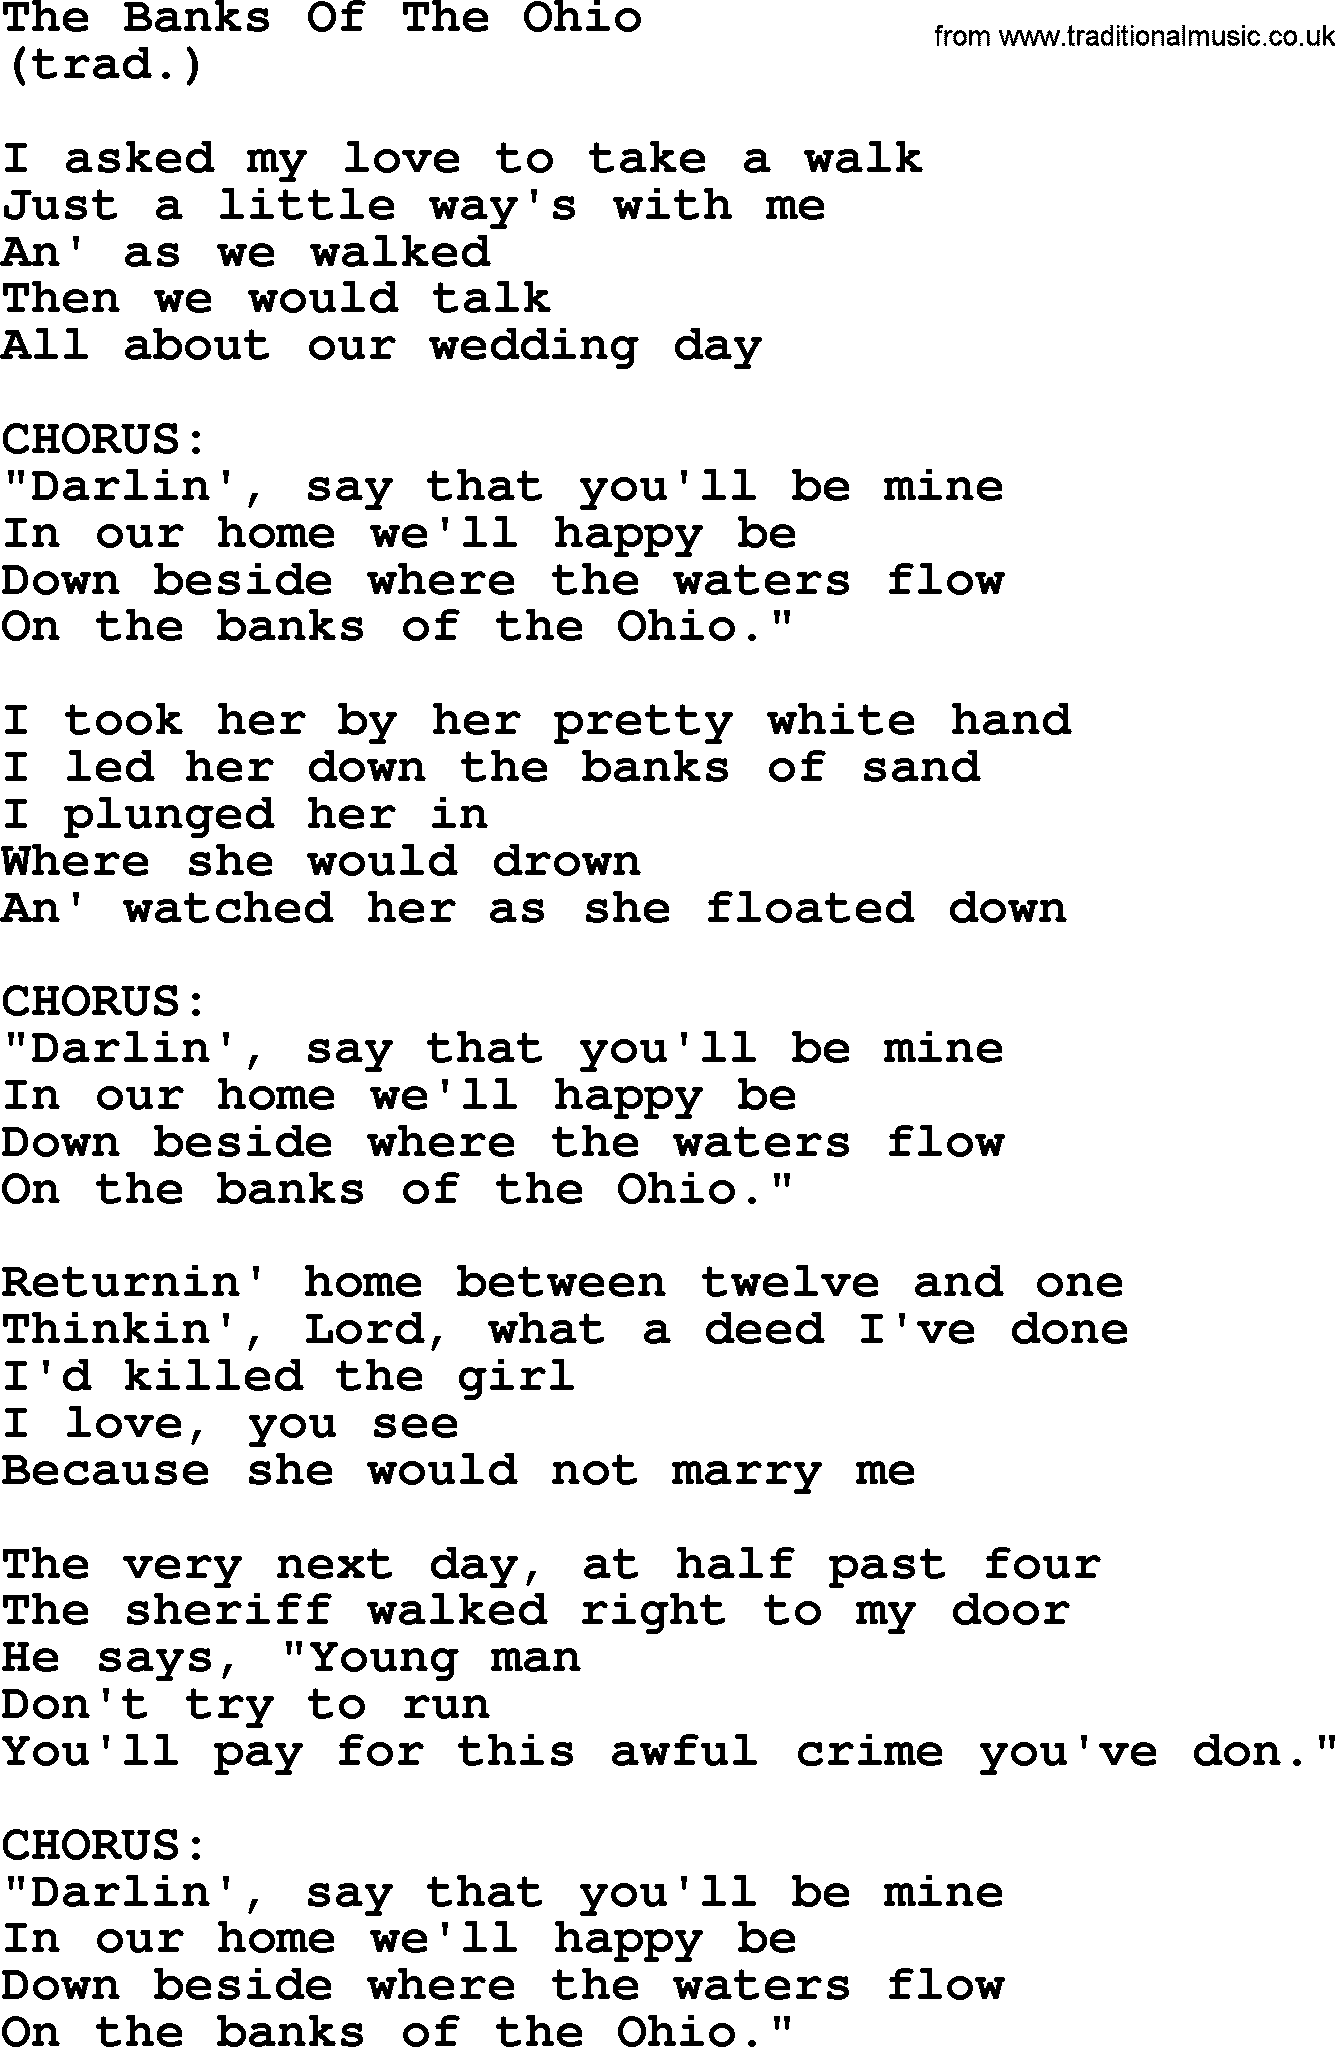 The Byrds song The Banks Of The Ohio, lyrics